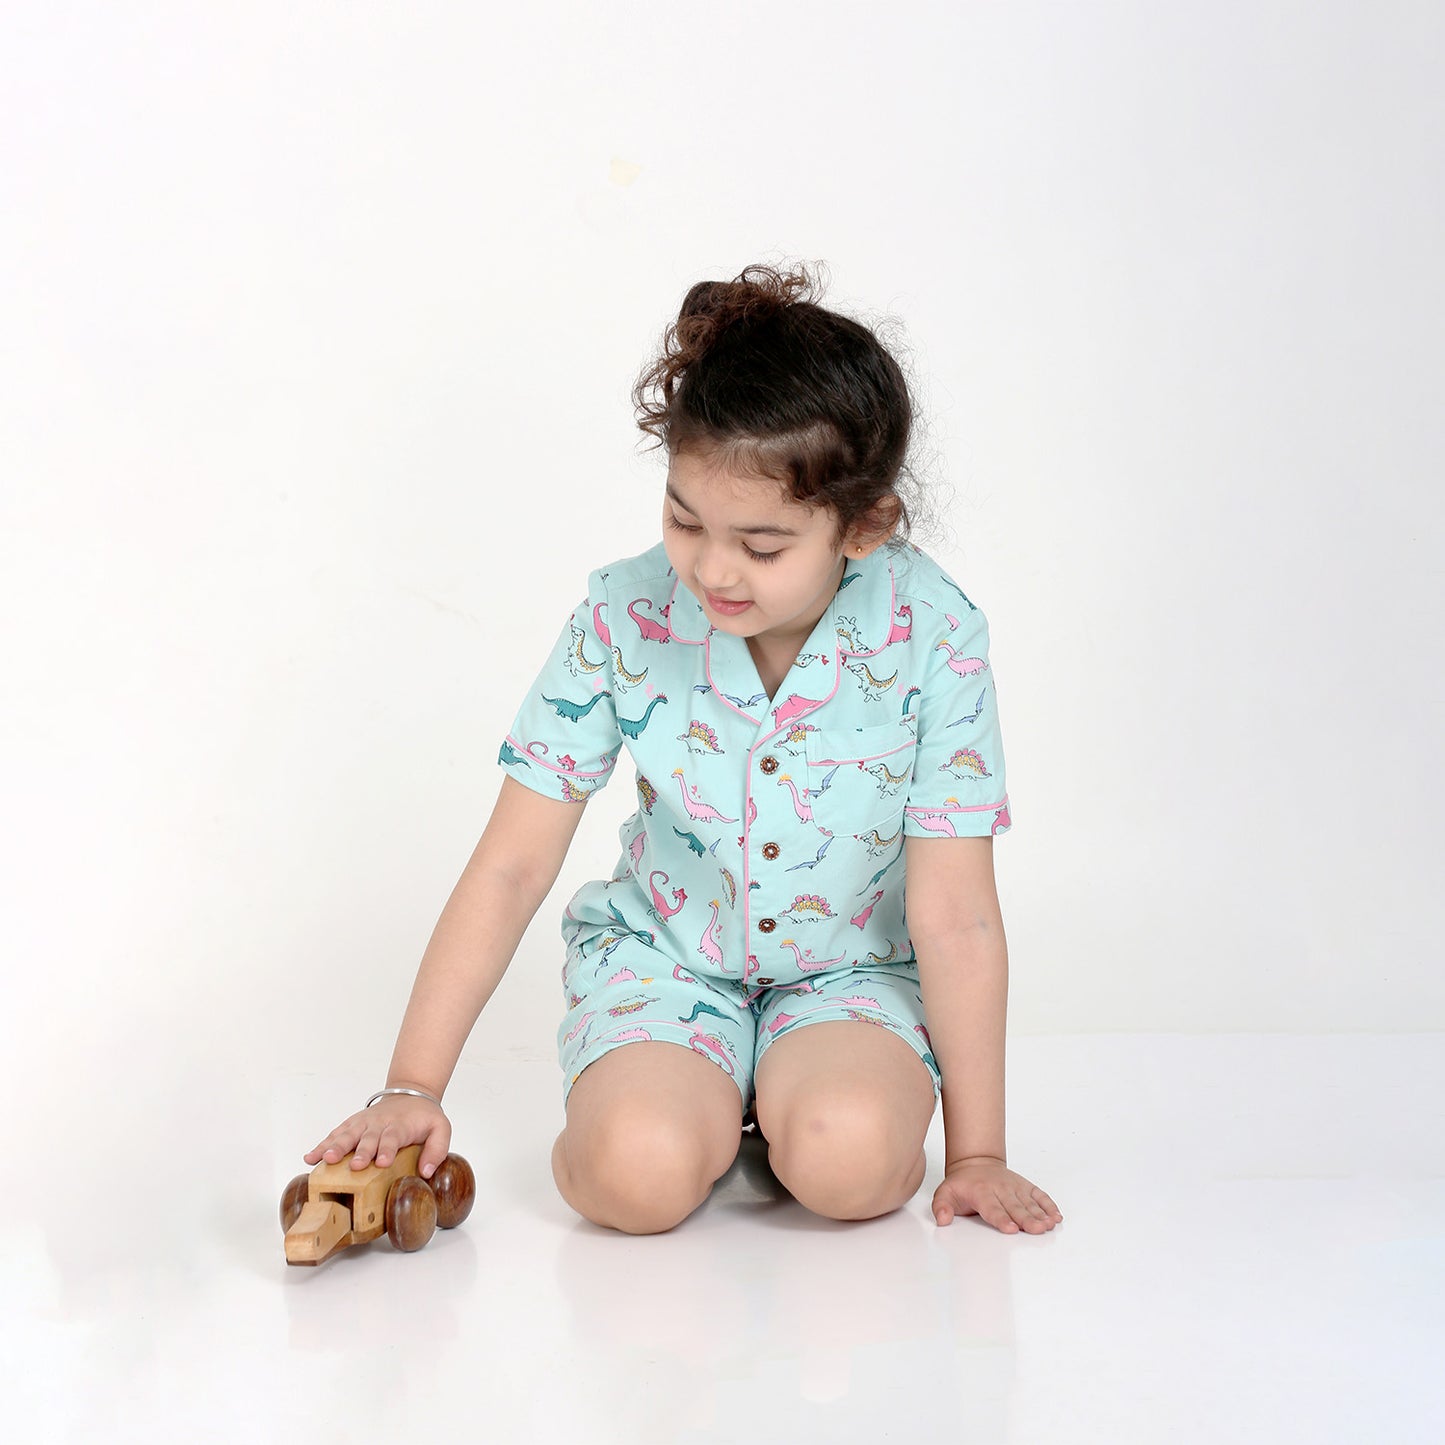 Notched Collared Sleepsuit in Dino Print for Girls